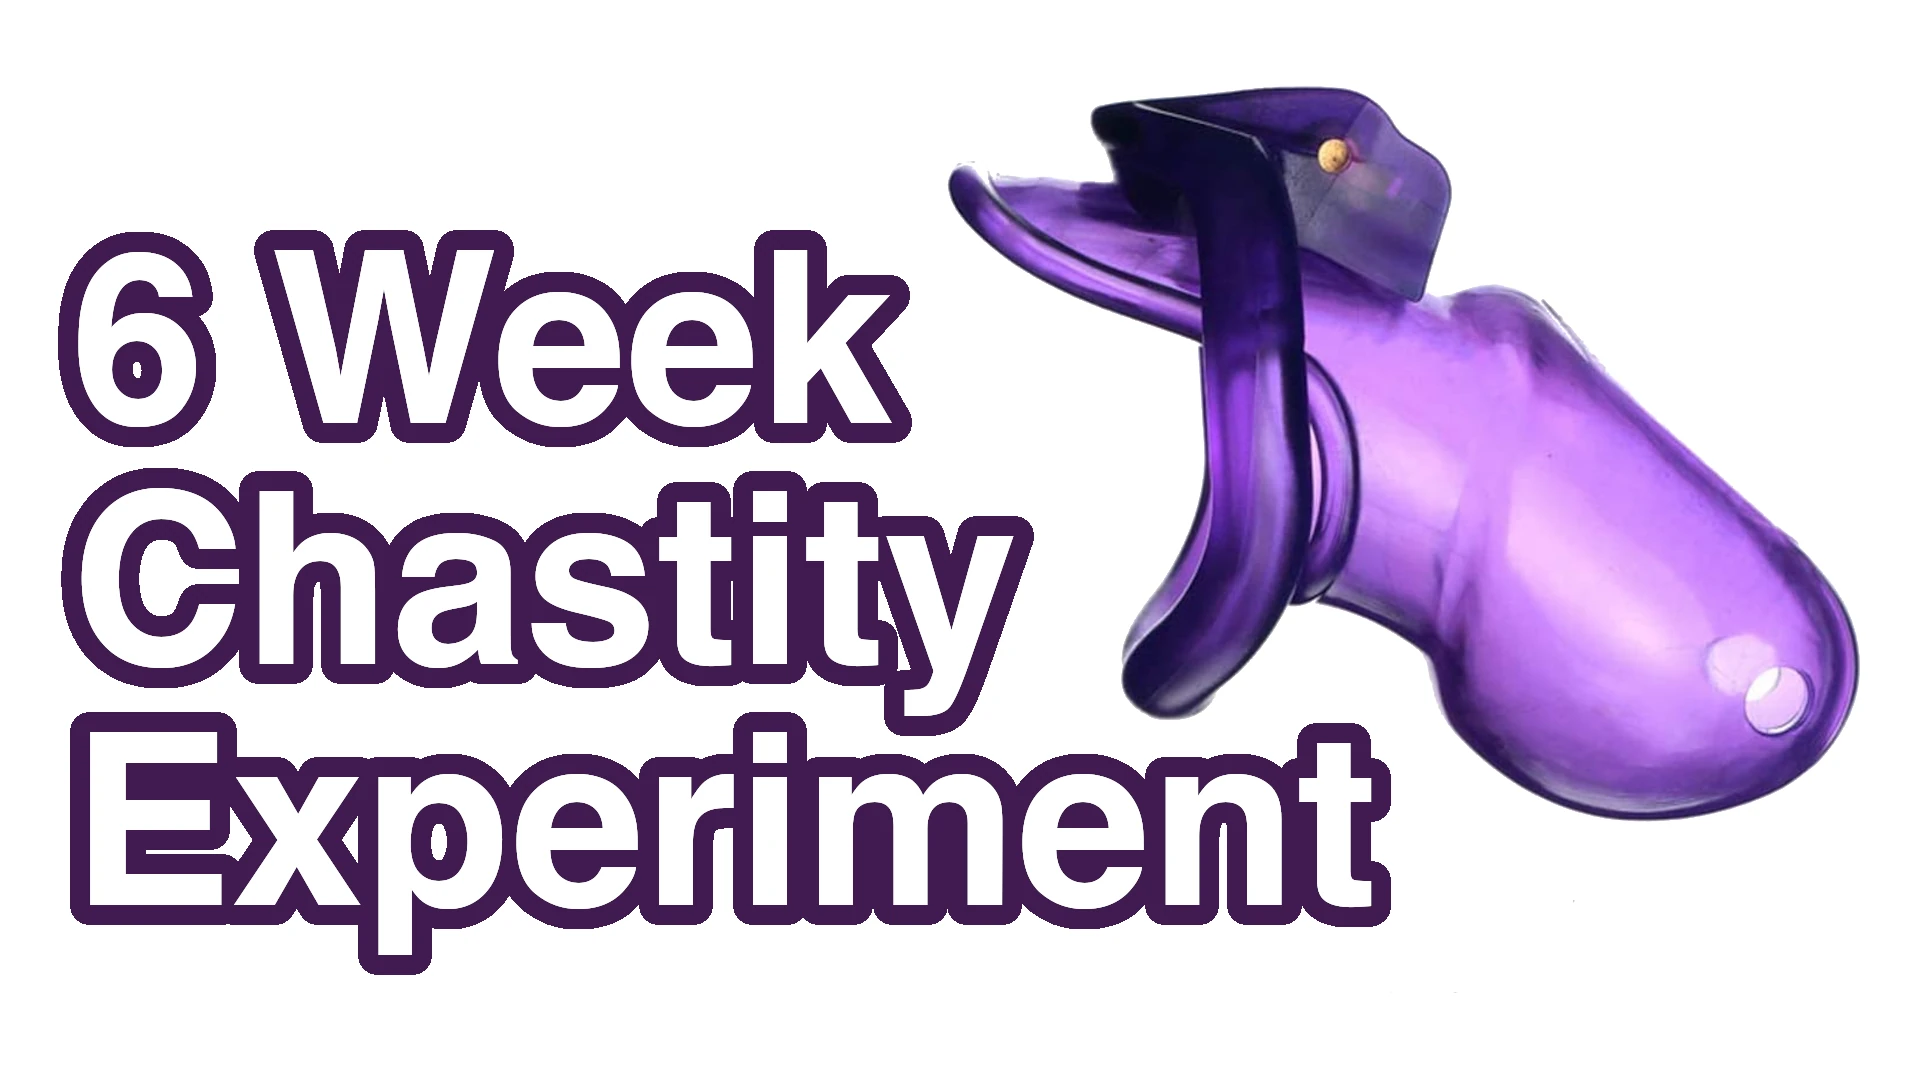 The Big 6 Week Chastity Experiment